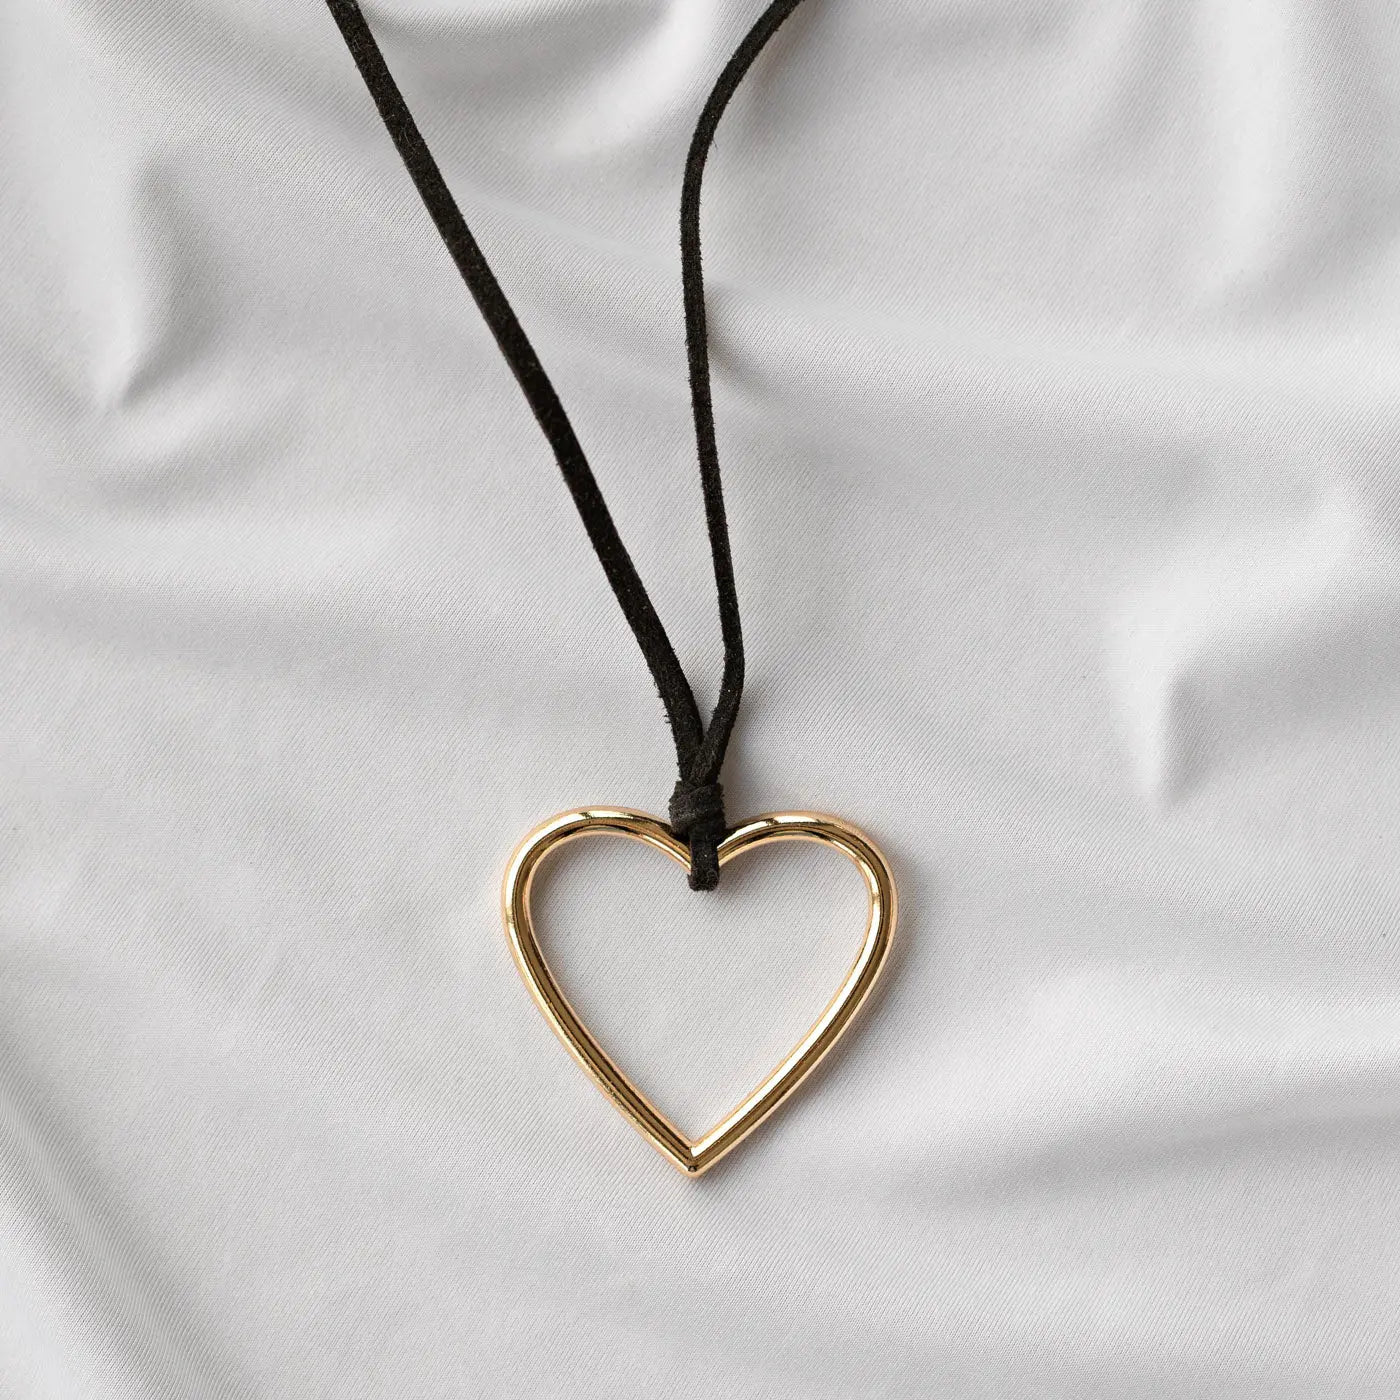 Molly - 90s Adjustable Heart Necklace